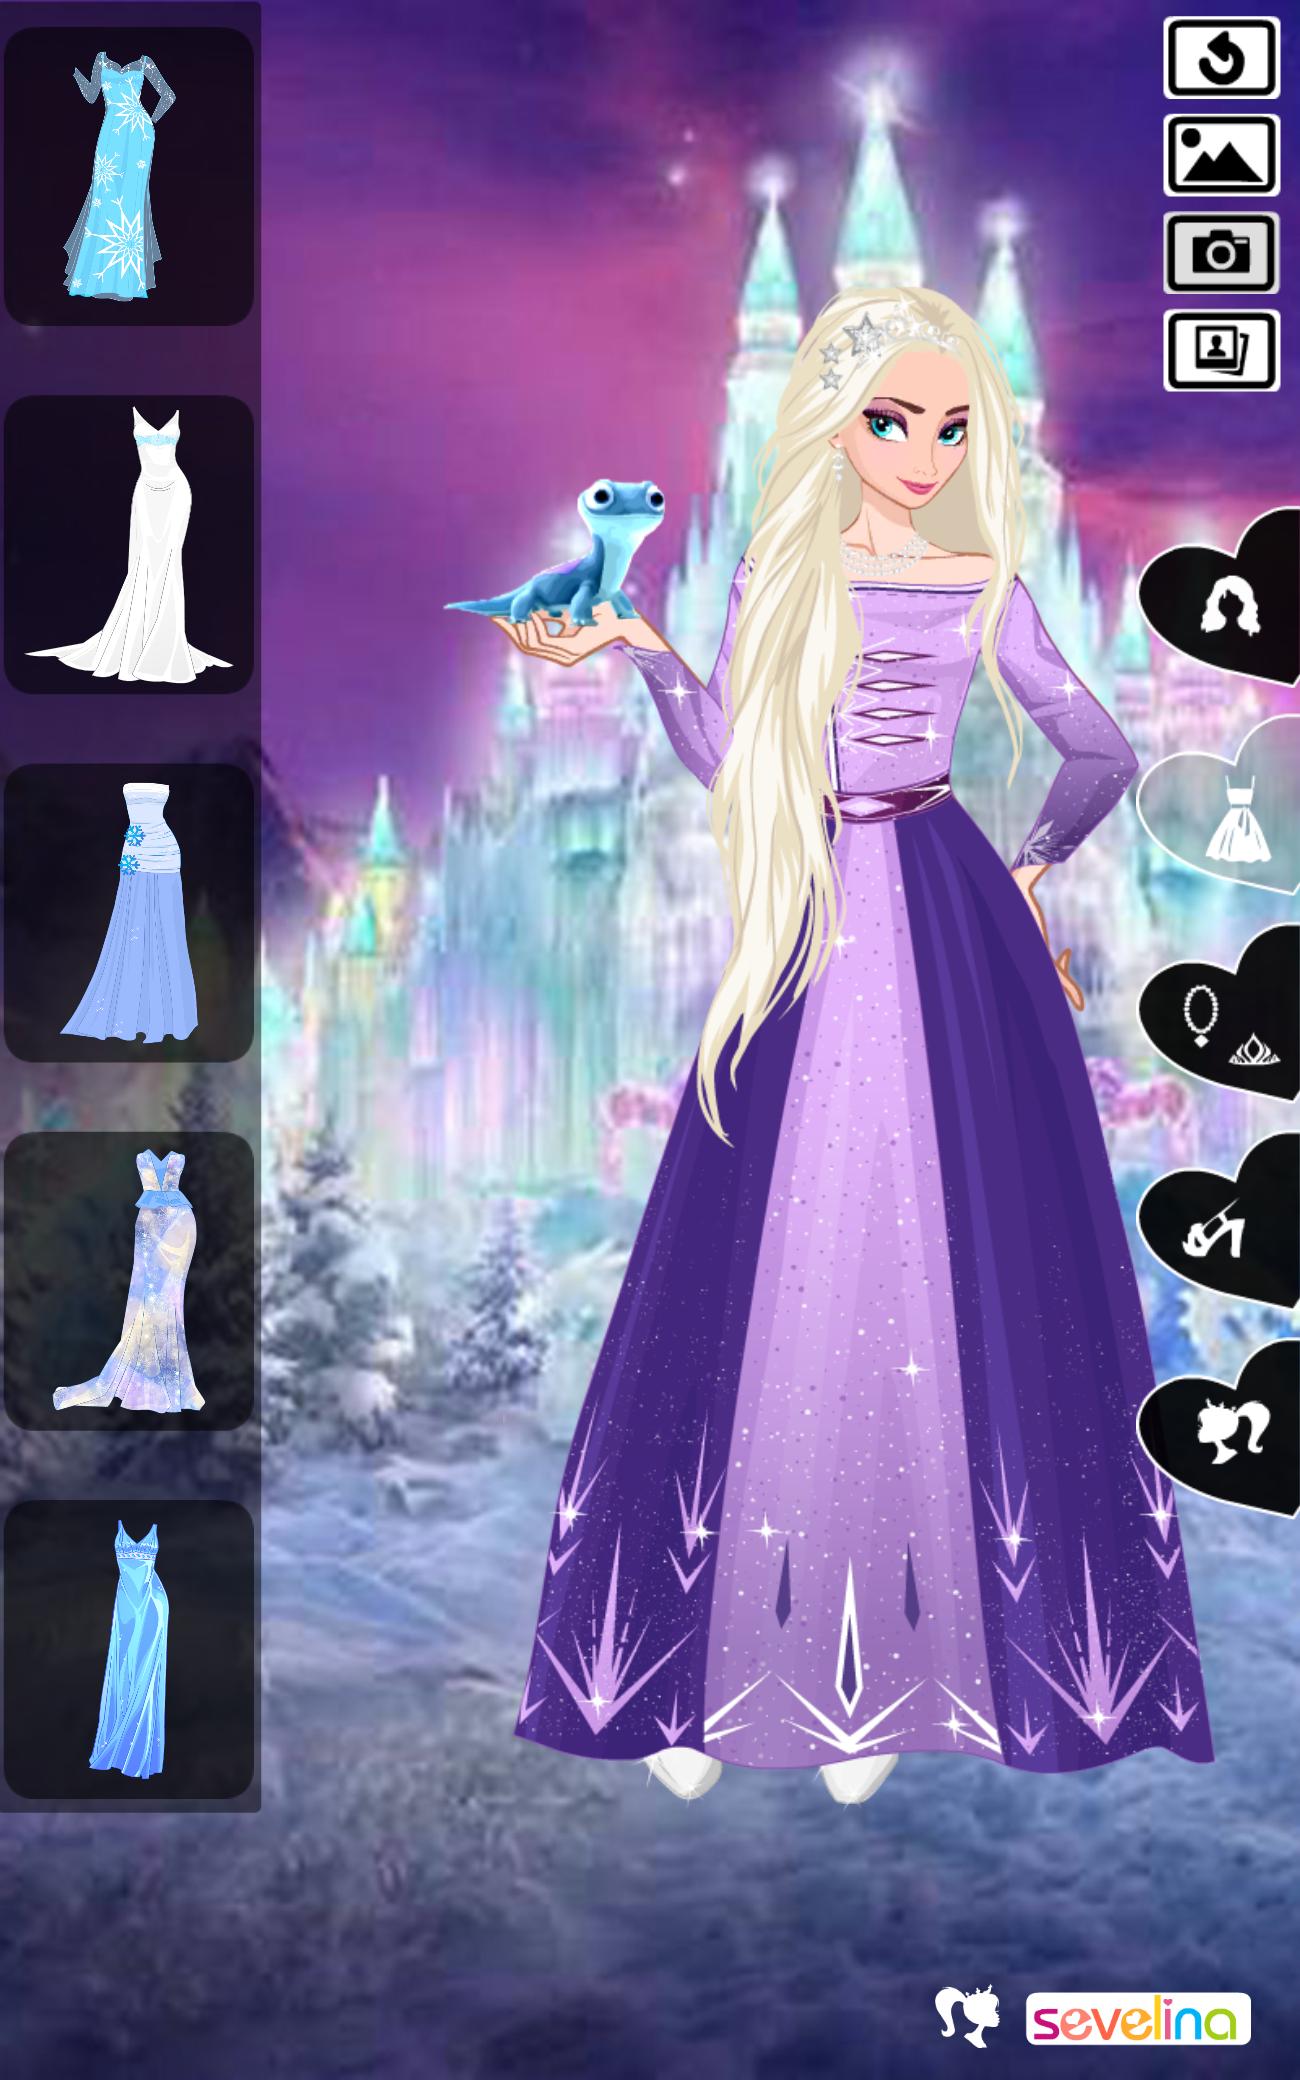 ❄️ Icy or Fire 🔥 dress up game ❄️ Frozen land 2.4 Screenshot 2